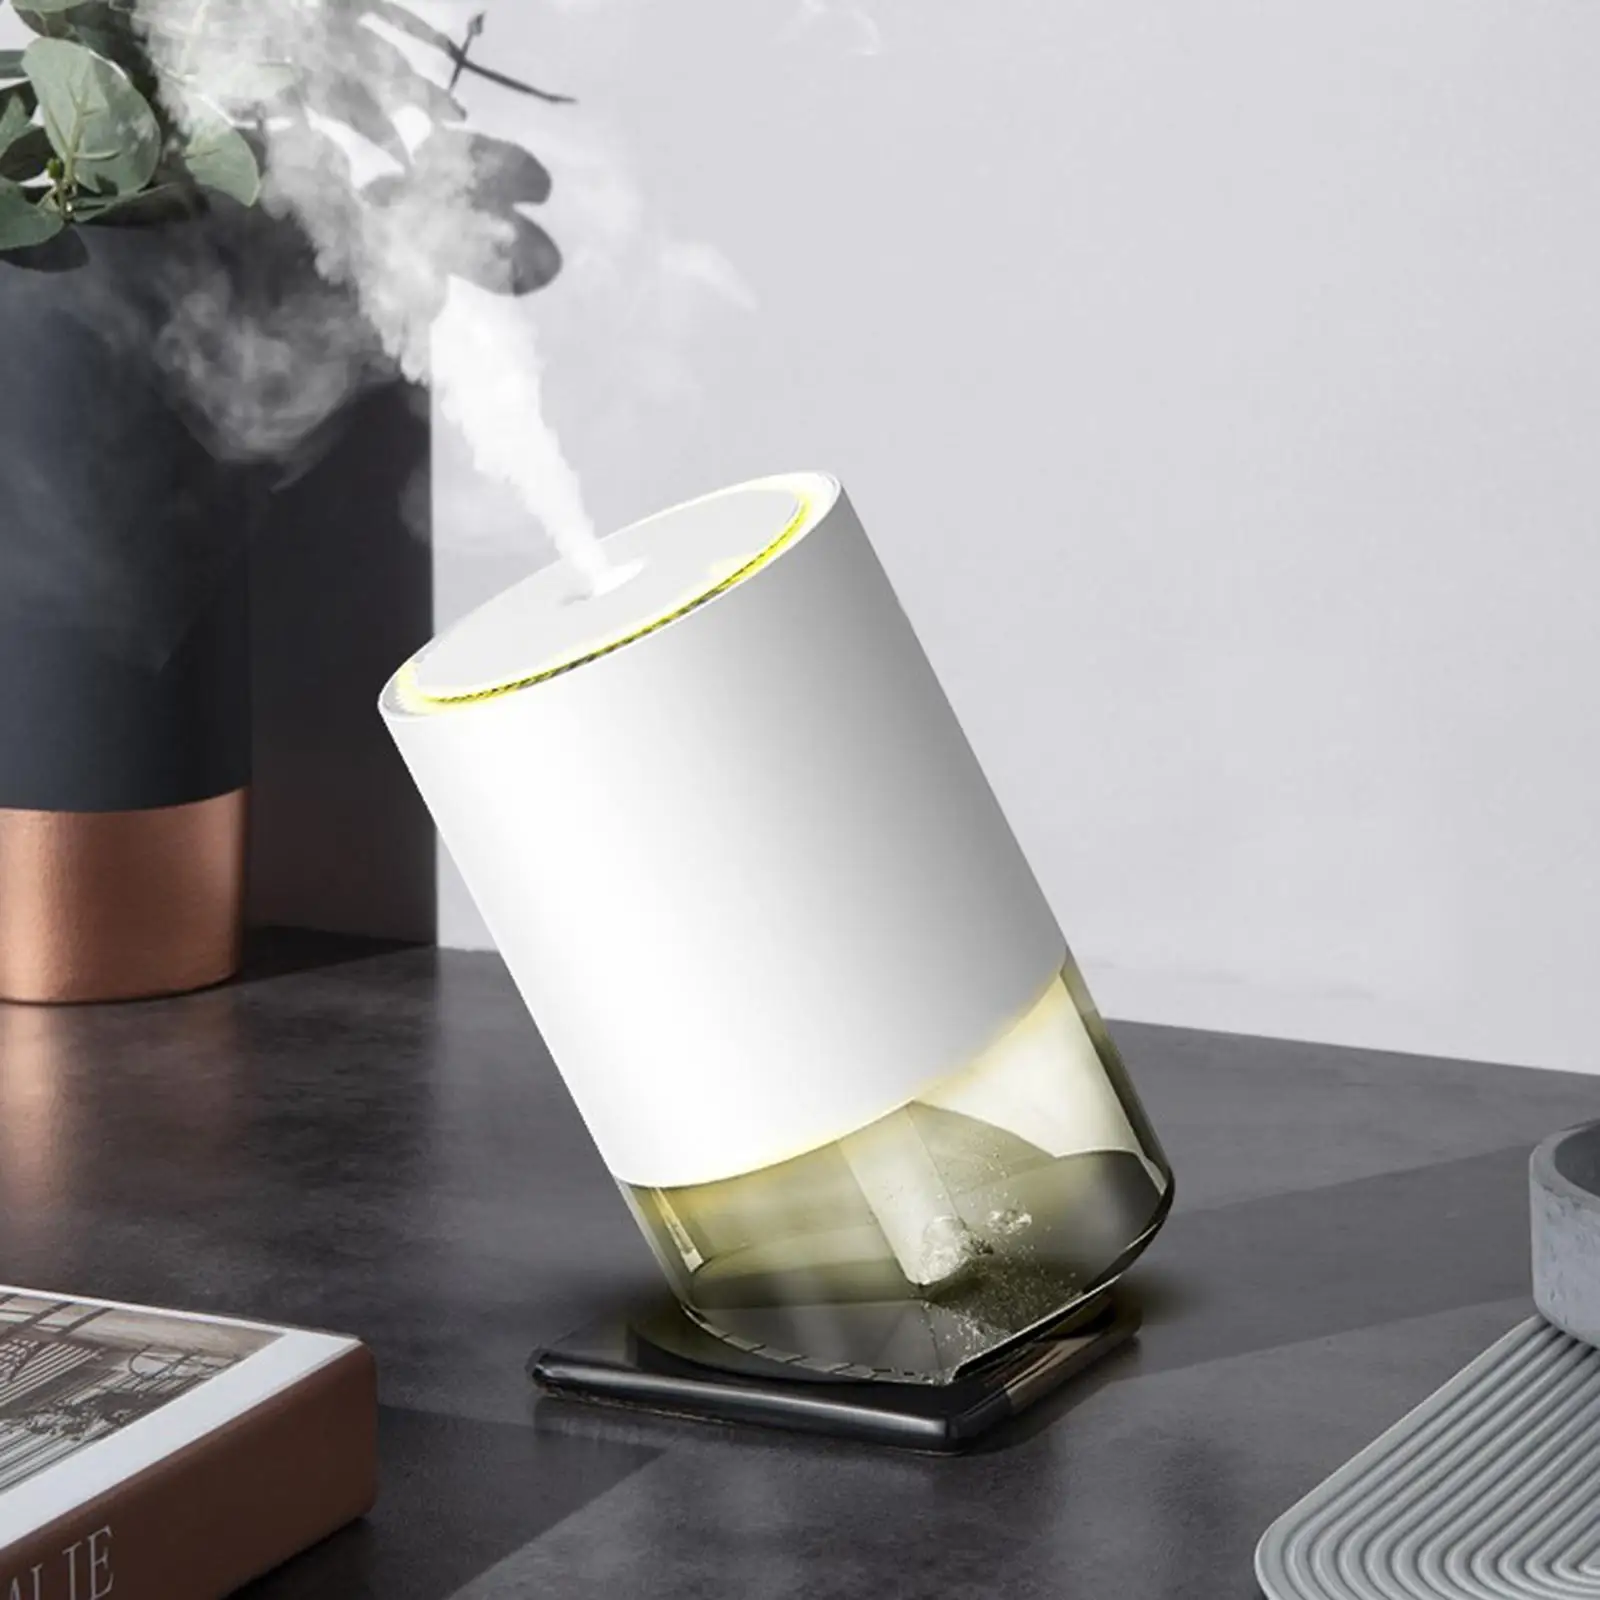 Cool Mist Humidifier, 390ml Water Tank, , Auto Shut-Off for Bedroom, Home, Office